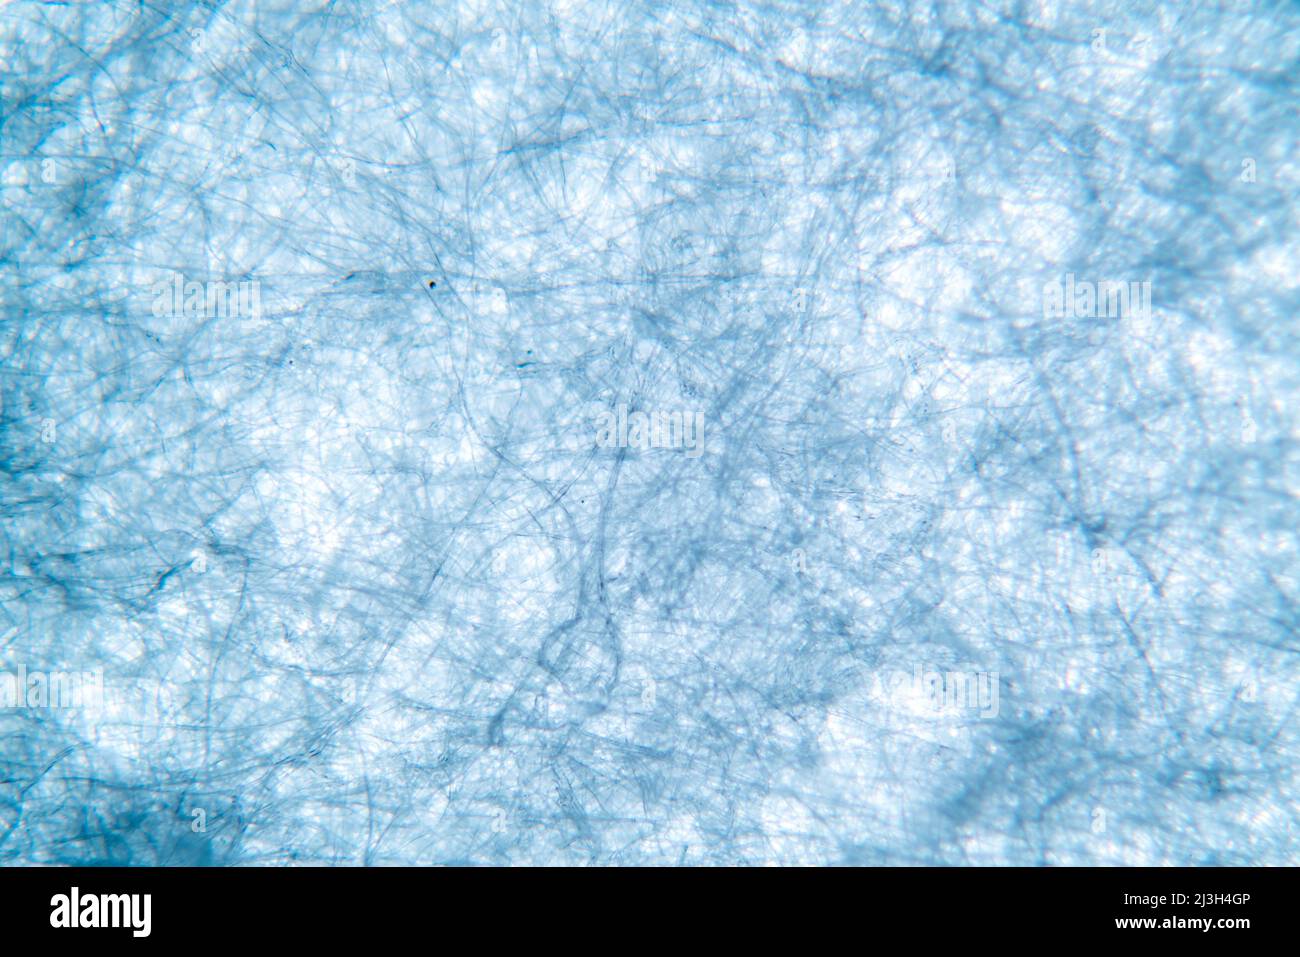 Nonwoven Synthetic Material for Air Filter Under Microscope Stock Photo